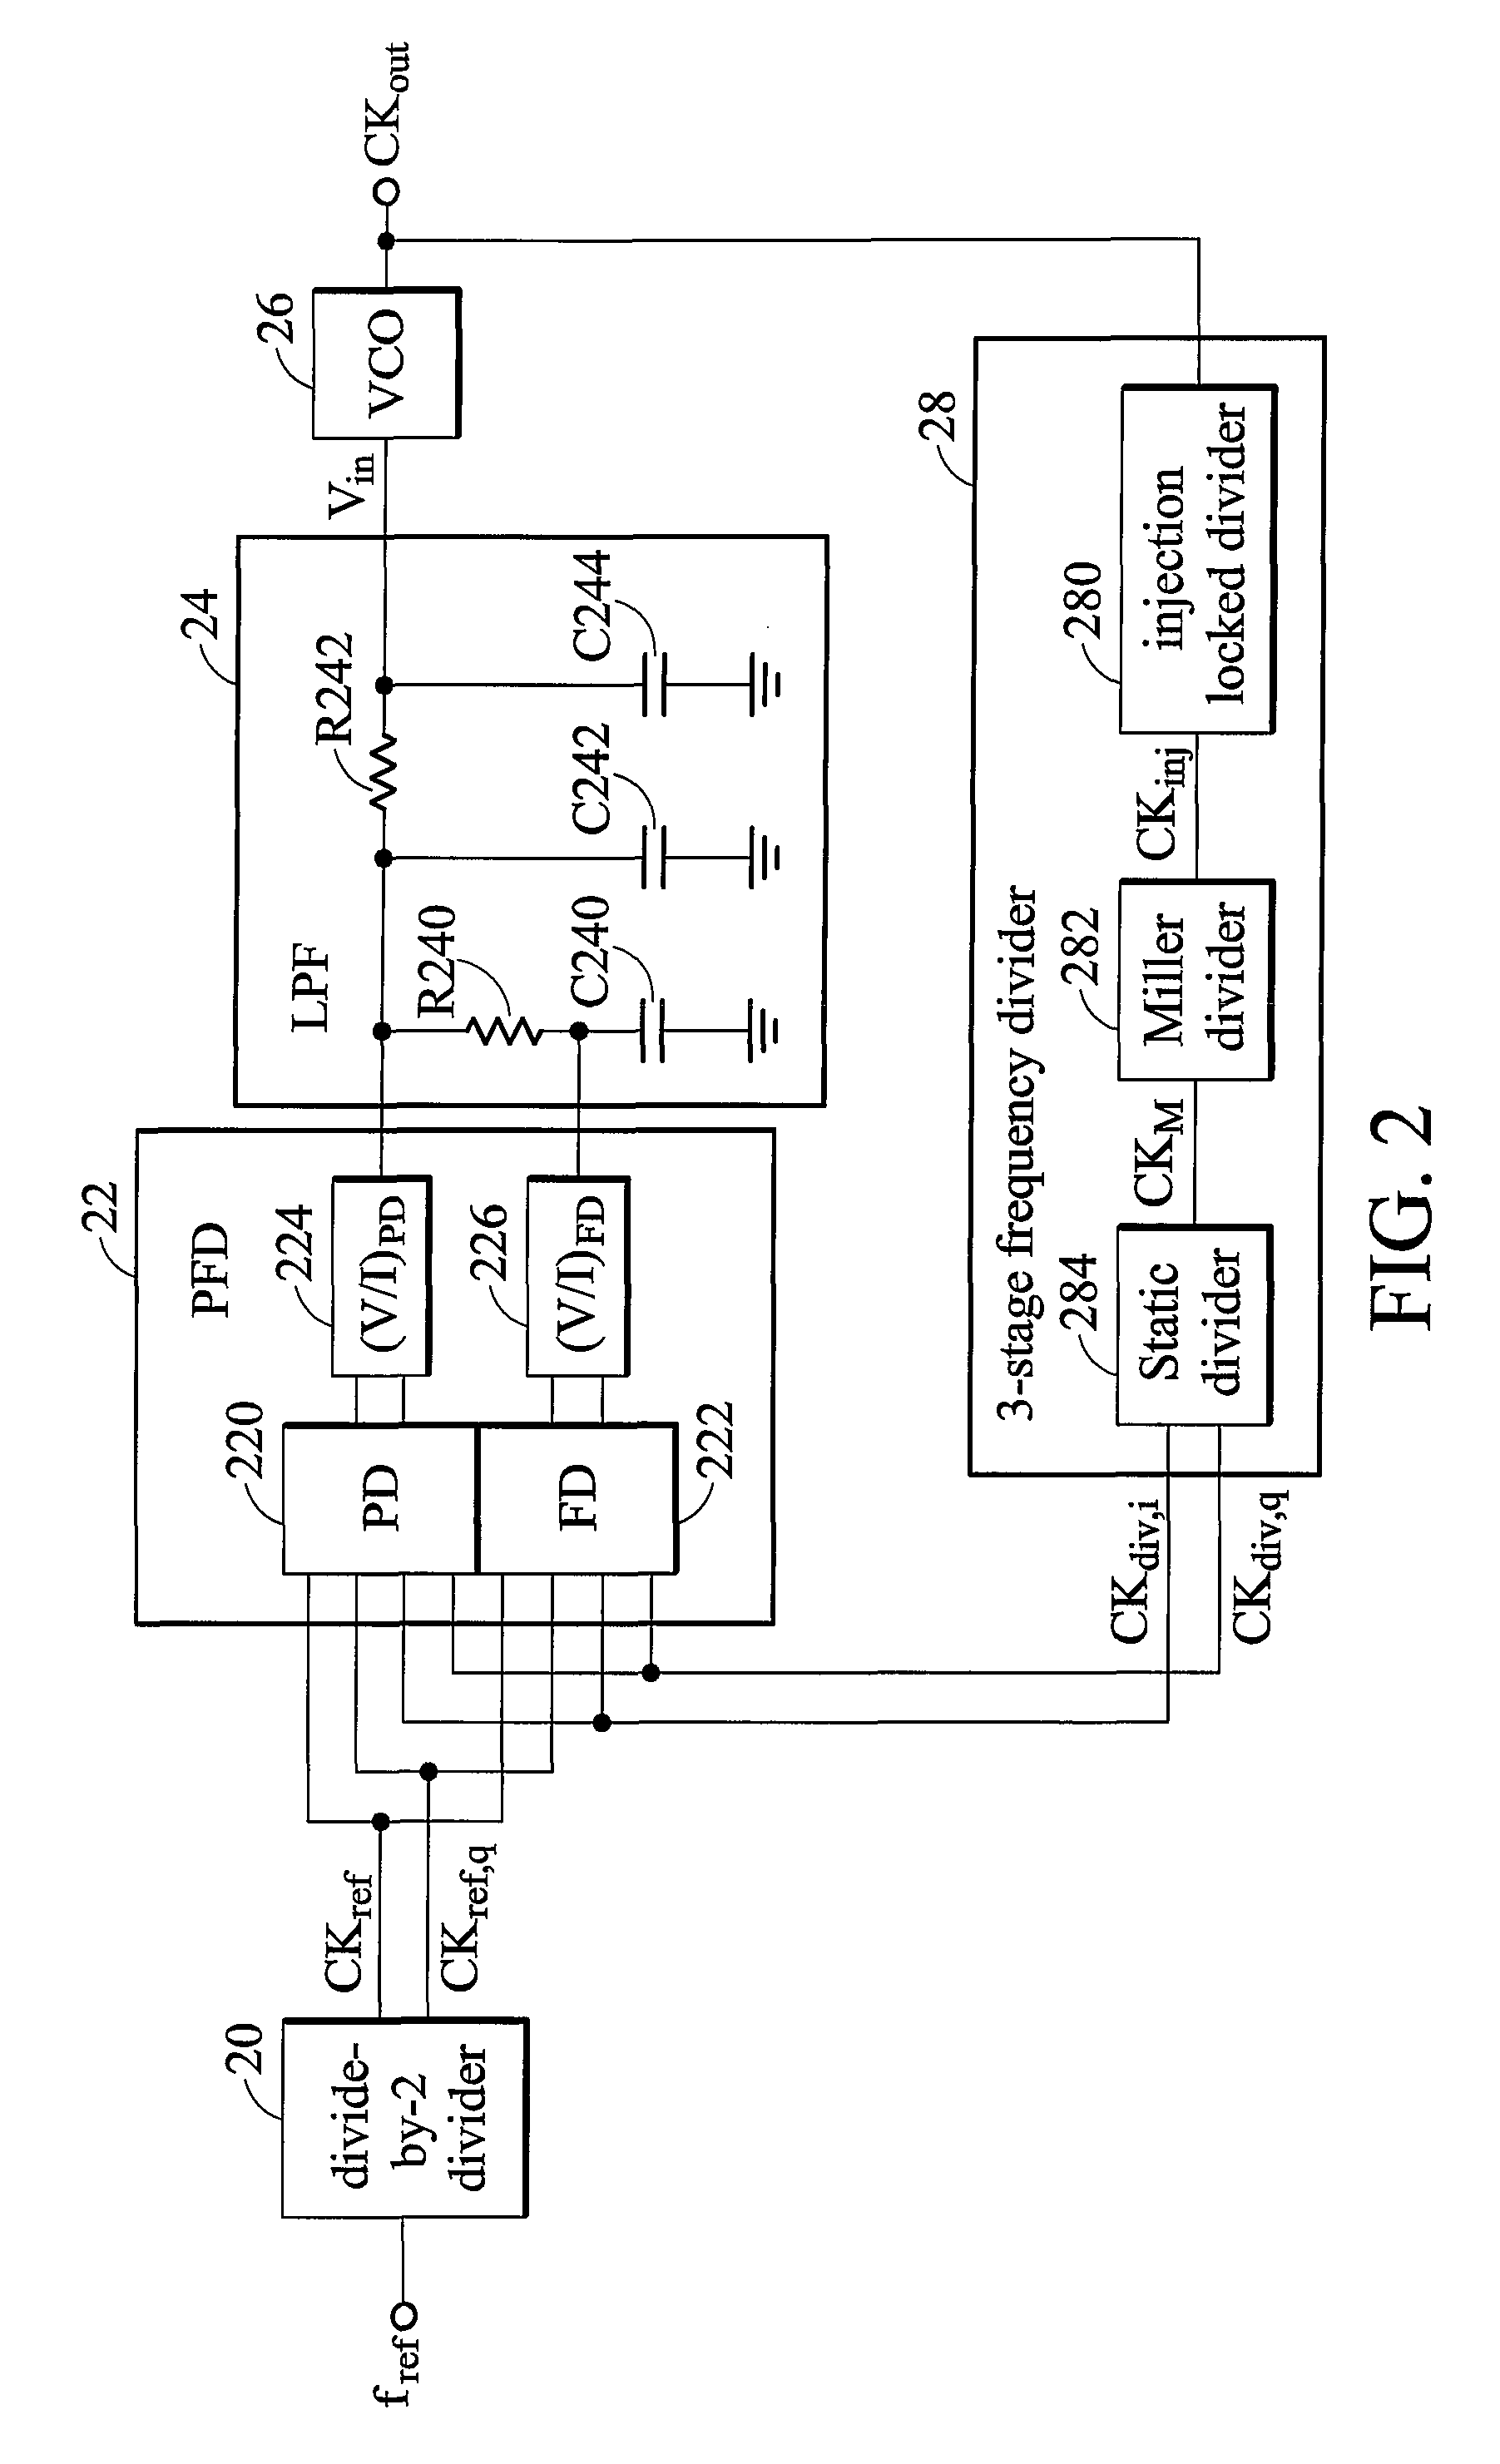 Phase locked loop, voltage controlled oscillator, and phase-frequency detector